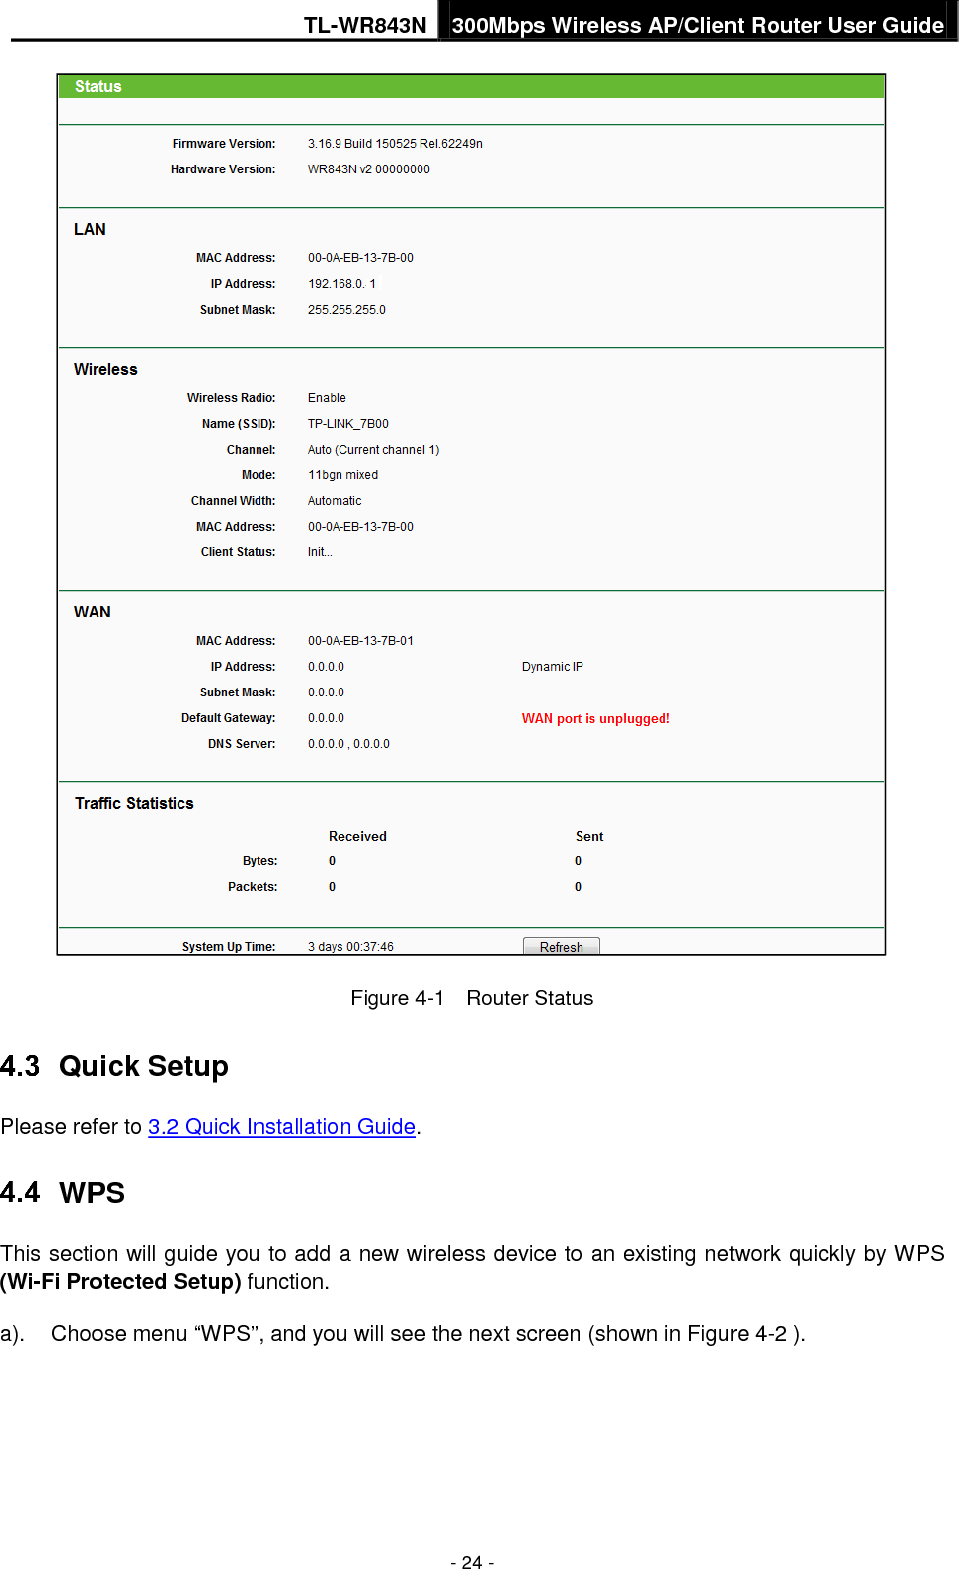 TL-WR843N 300Mbps Wireless AP/Client Router User Guide - 24 - Figure 4-1  Router Status  Quick Setup Please refer to 3.2 Quick Installation Guide. WPS This section will guide you to add a new wireless device to an existing network quickly by WPS (Wi-Fi Protected Setup) function.   a). Choose menu “WPS”, and you will see the next screen (shown in Figure 4-2 ).   